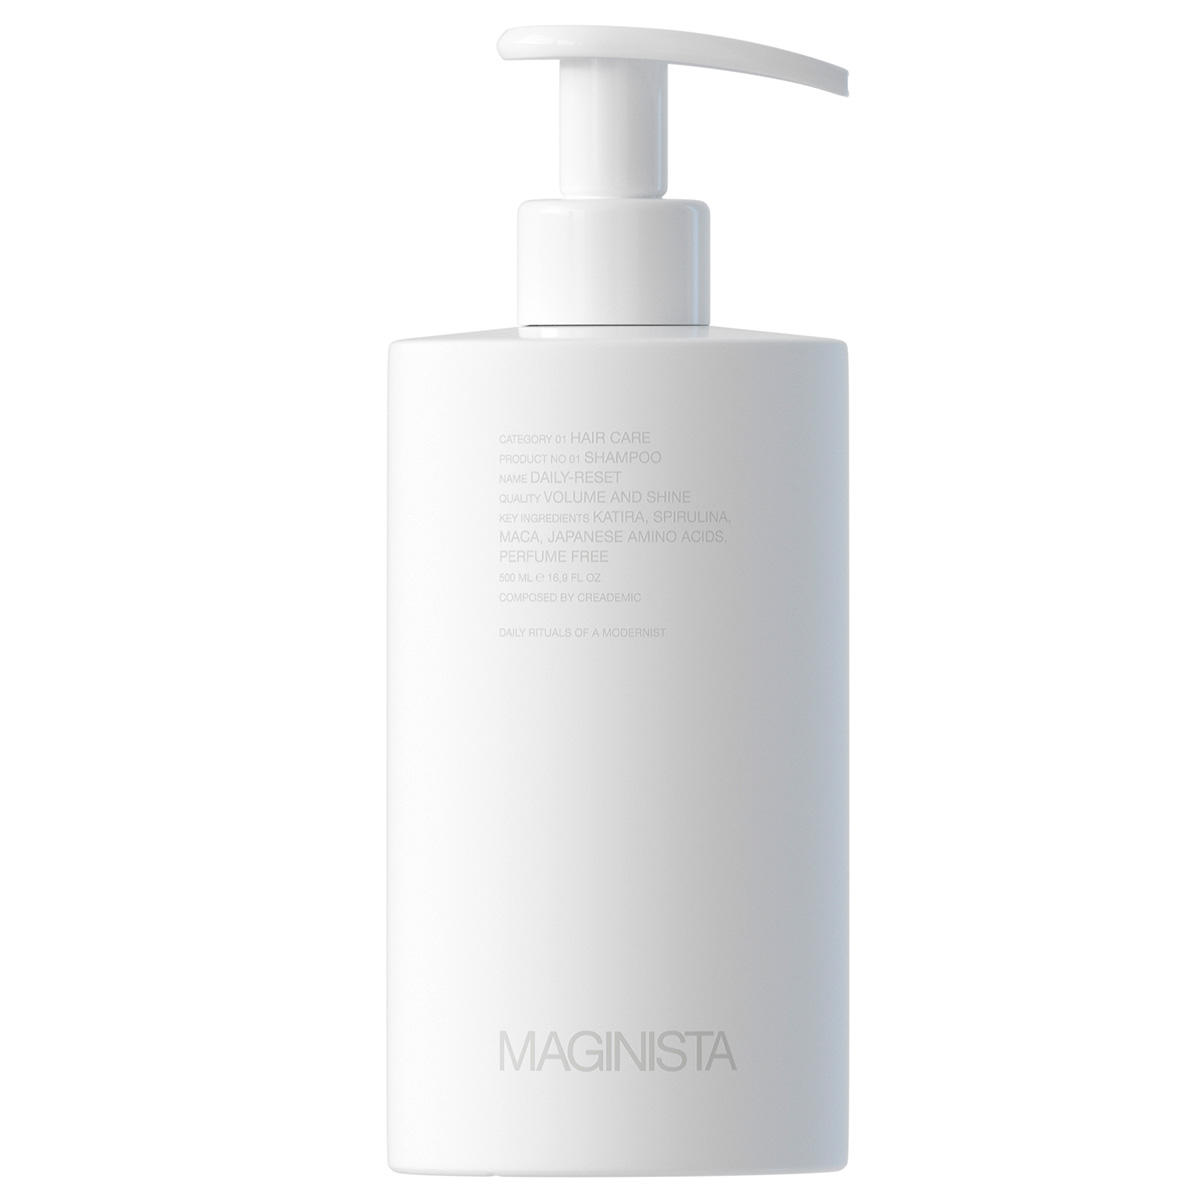 maginista daily-reset shampoo fragrance free 500 ml